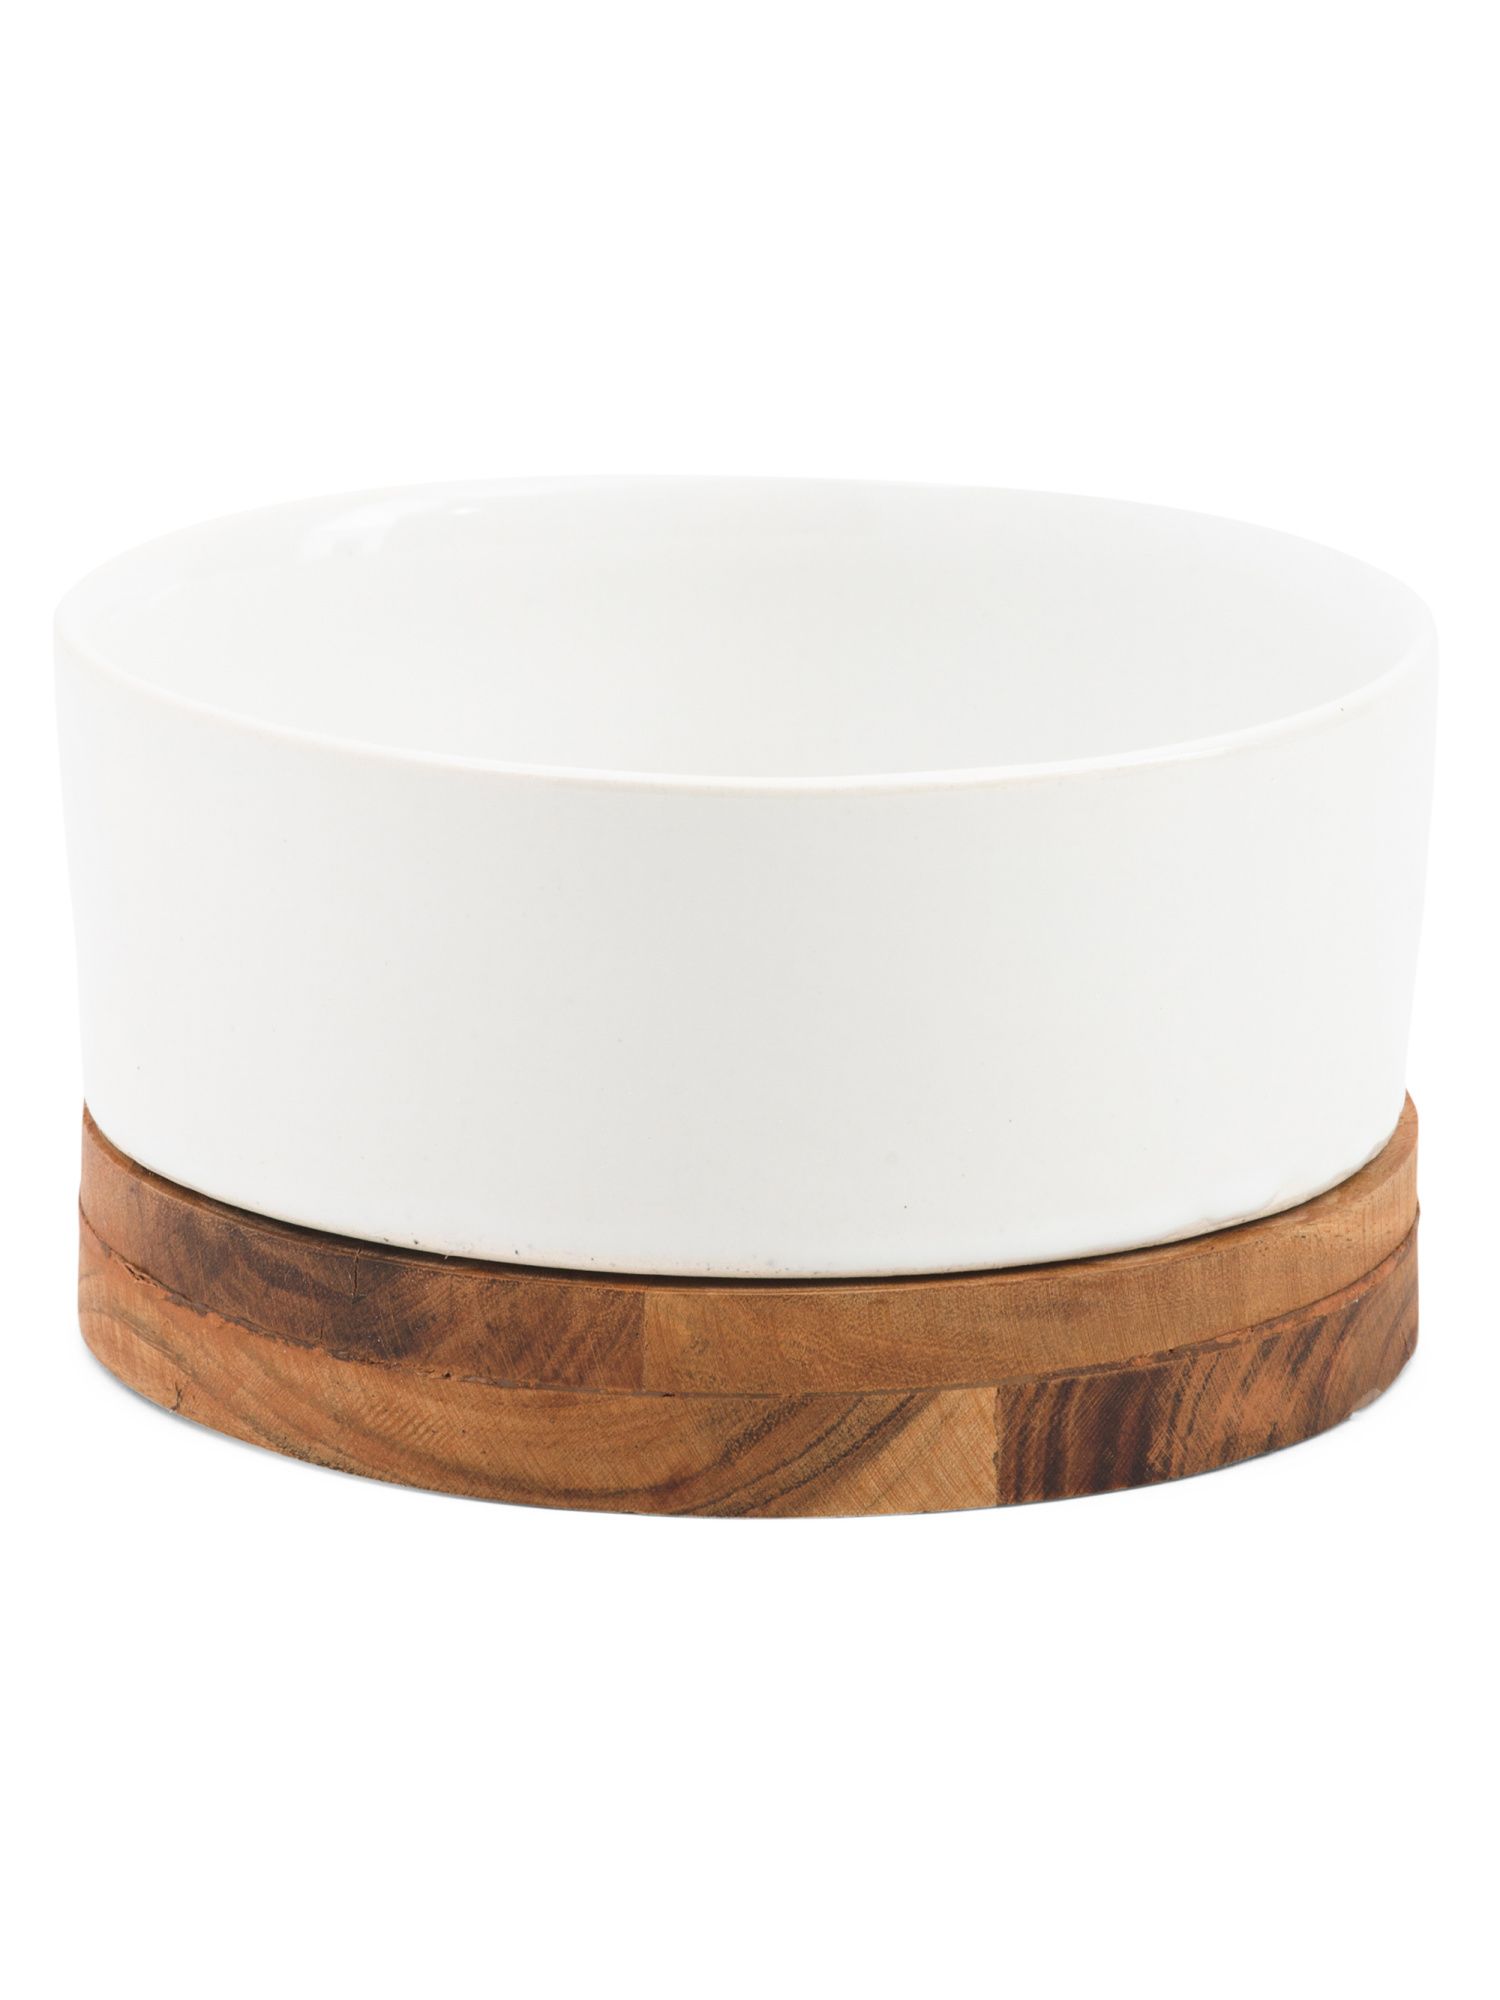 Ceramic Bowl With Wooden Base | TJ Maxx